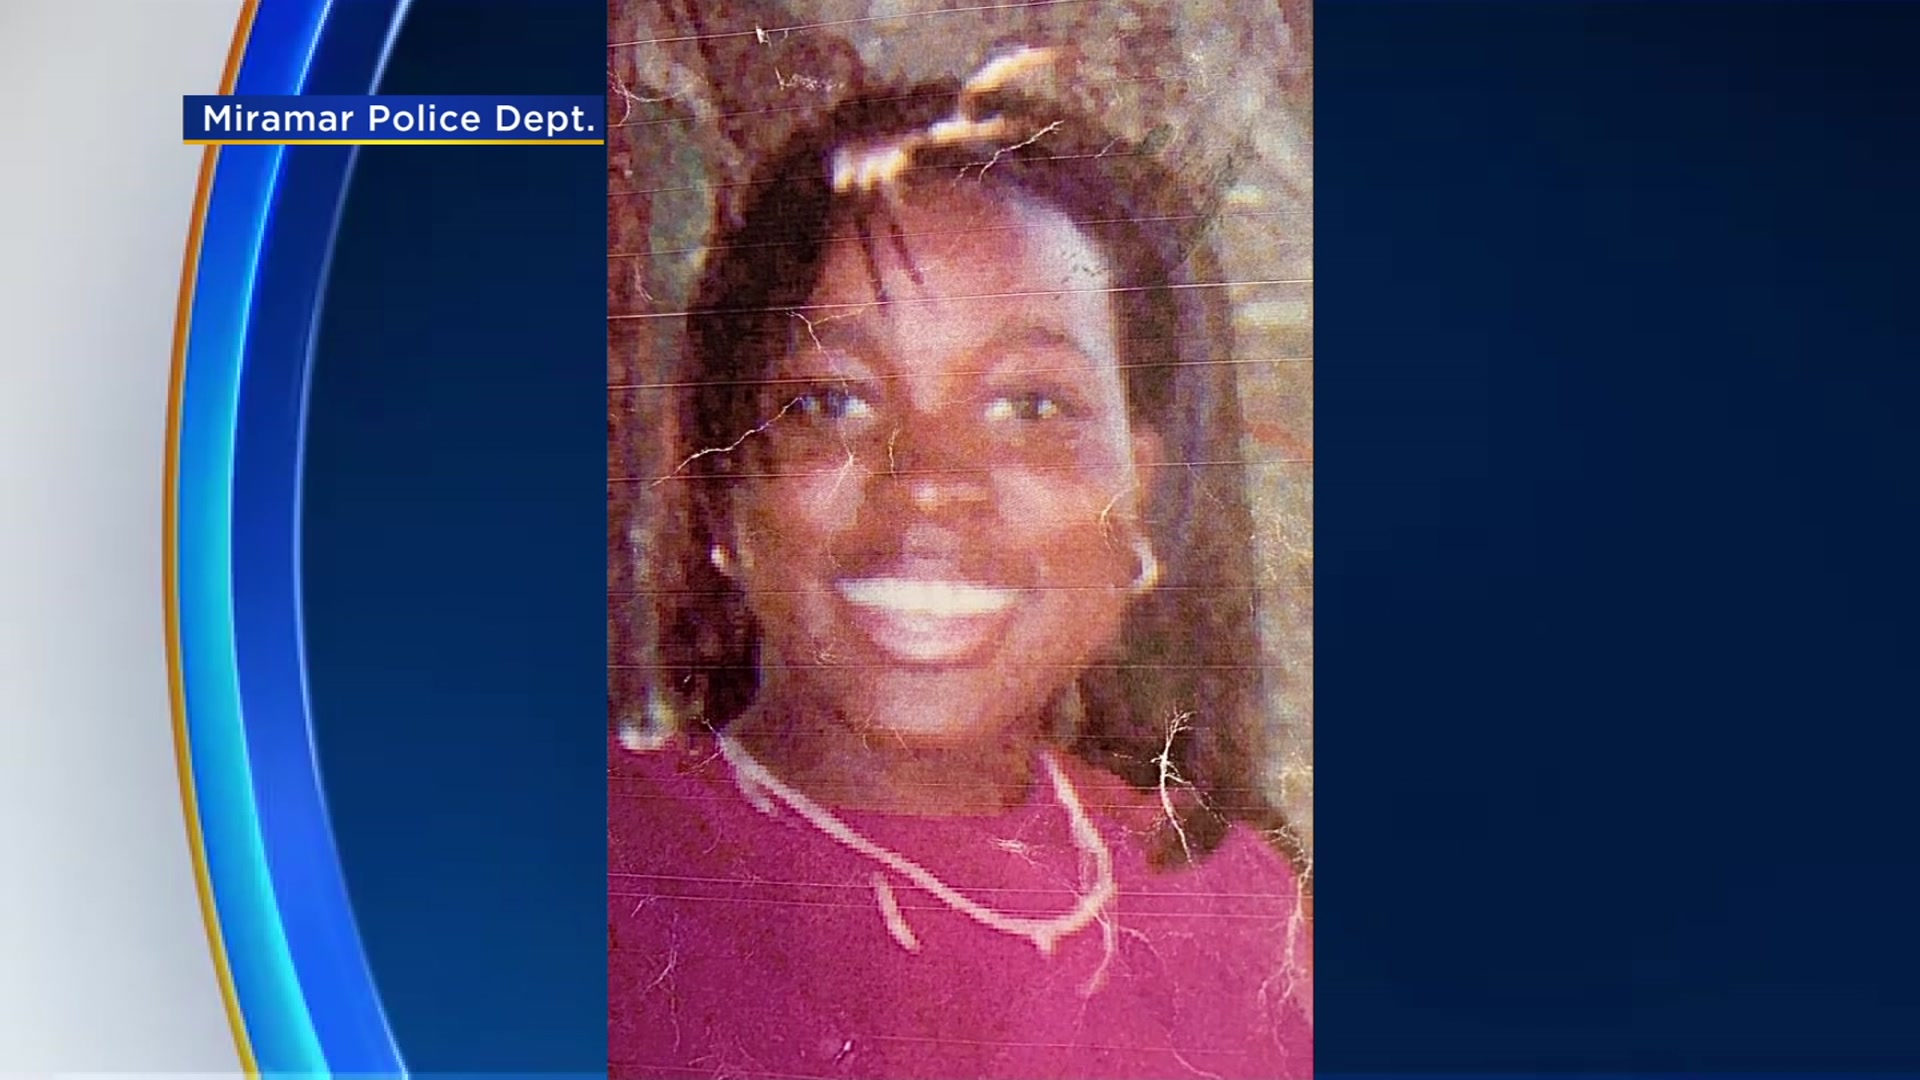 Arrest Made in 2002 Cold Case Murder of 15-Year-Old Florida Teen